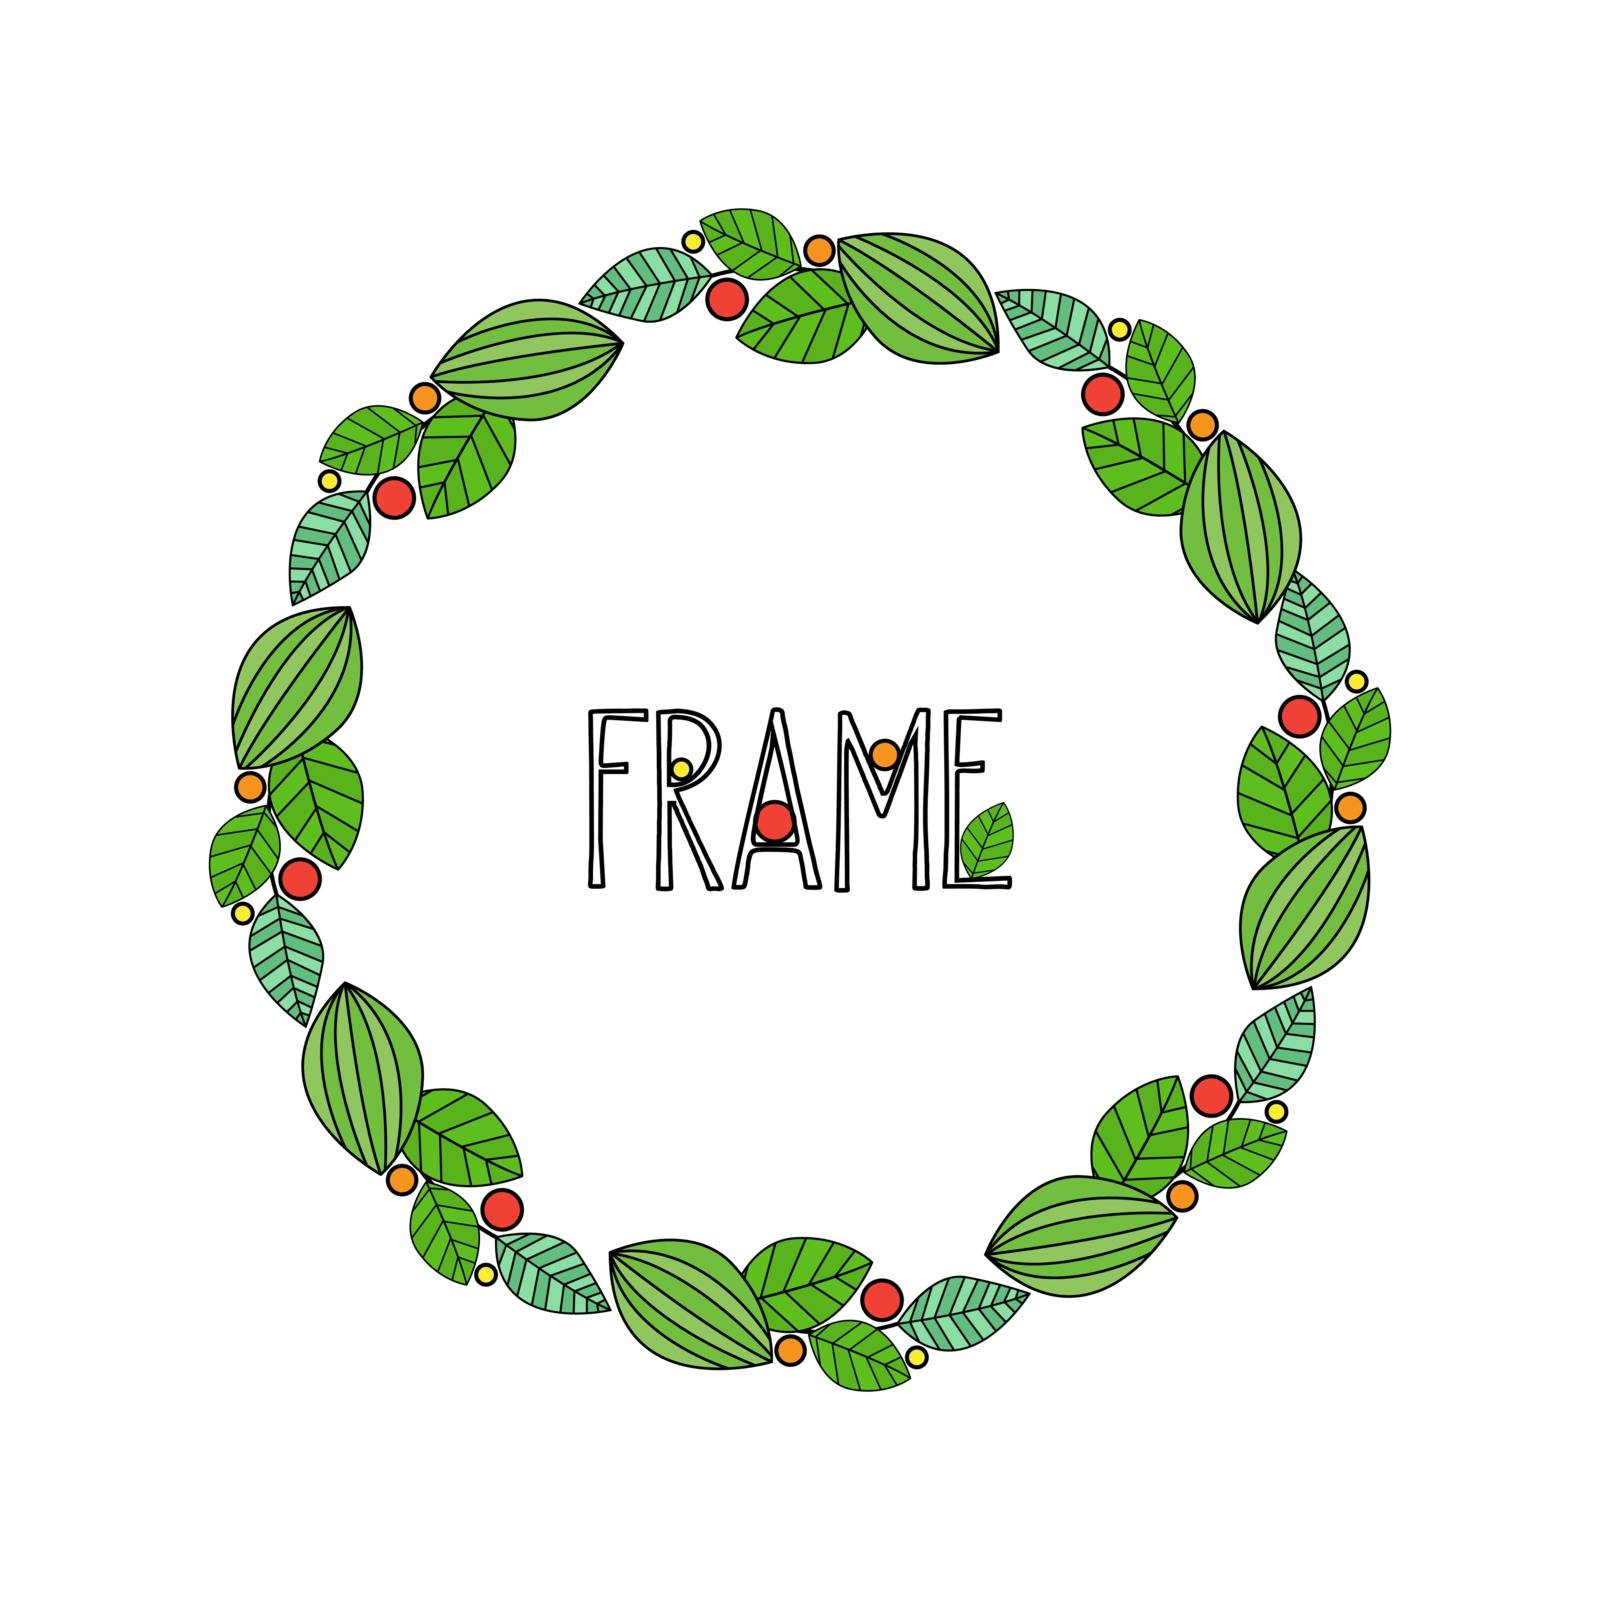 Vector illustration of a natural frame, romantic decoration branches with leaves